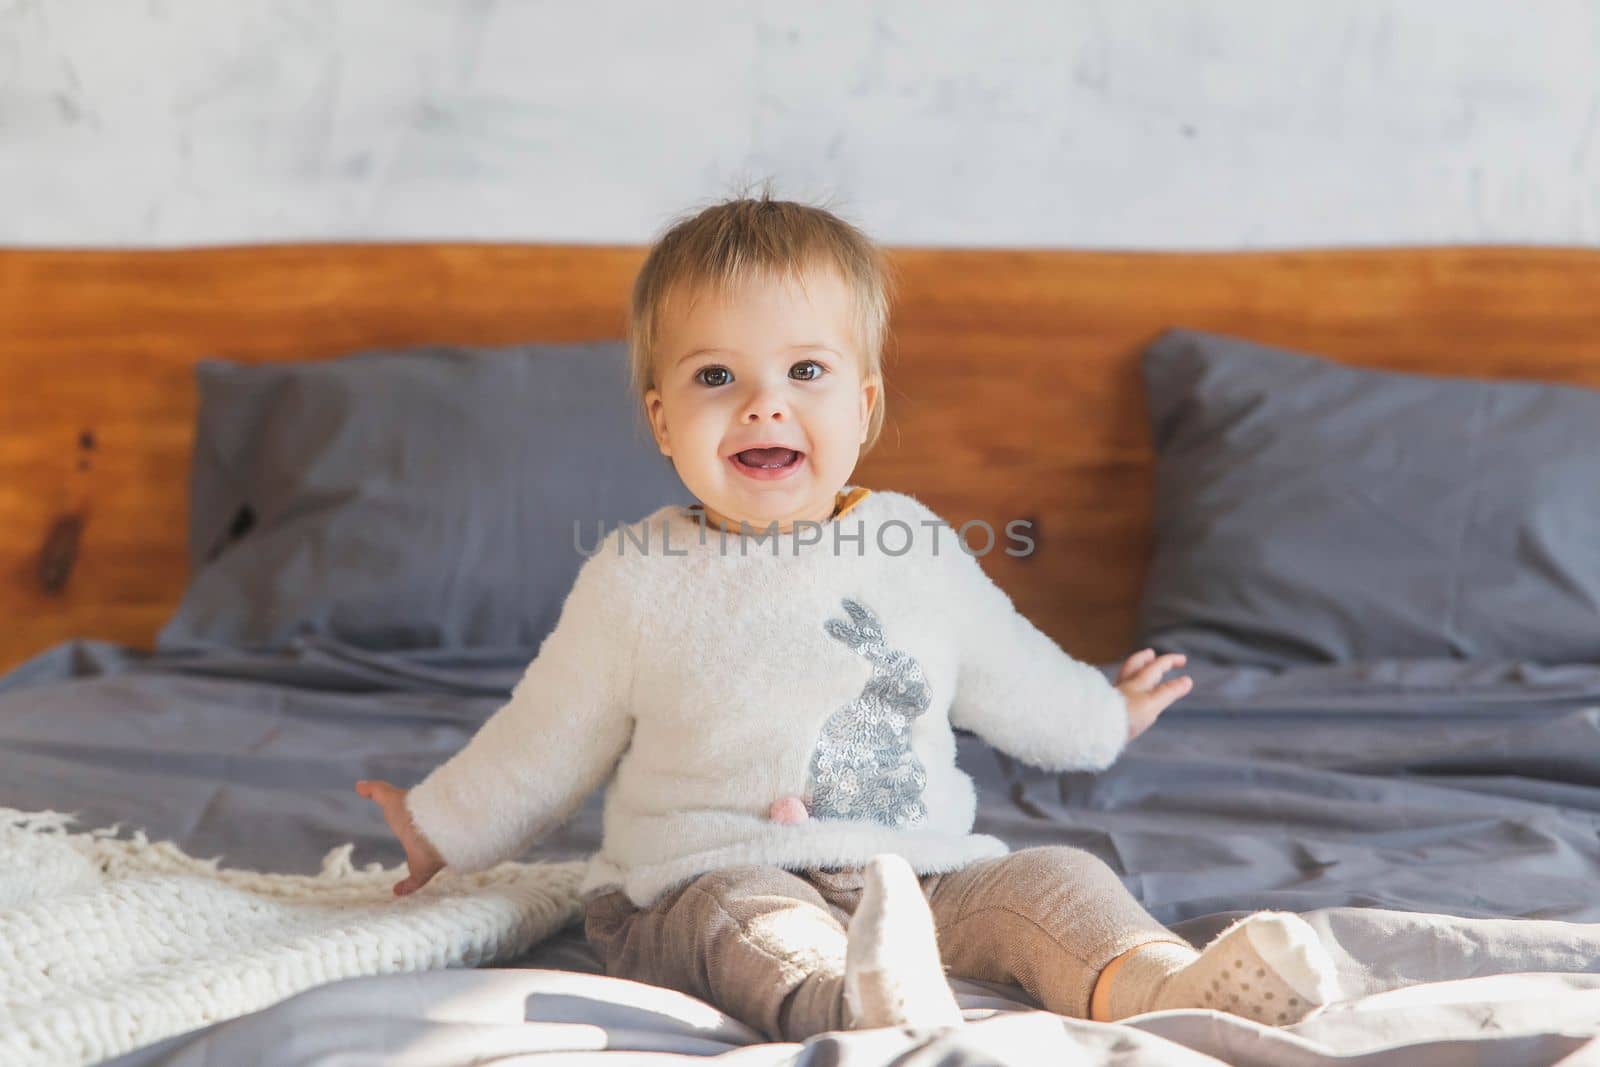 Cute baby lies on the bed and laughs so that two teeth are visible.